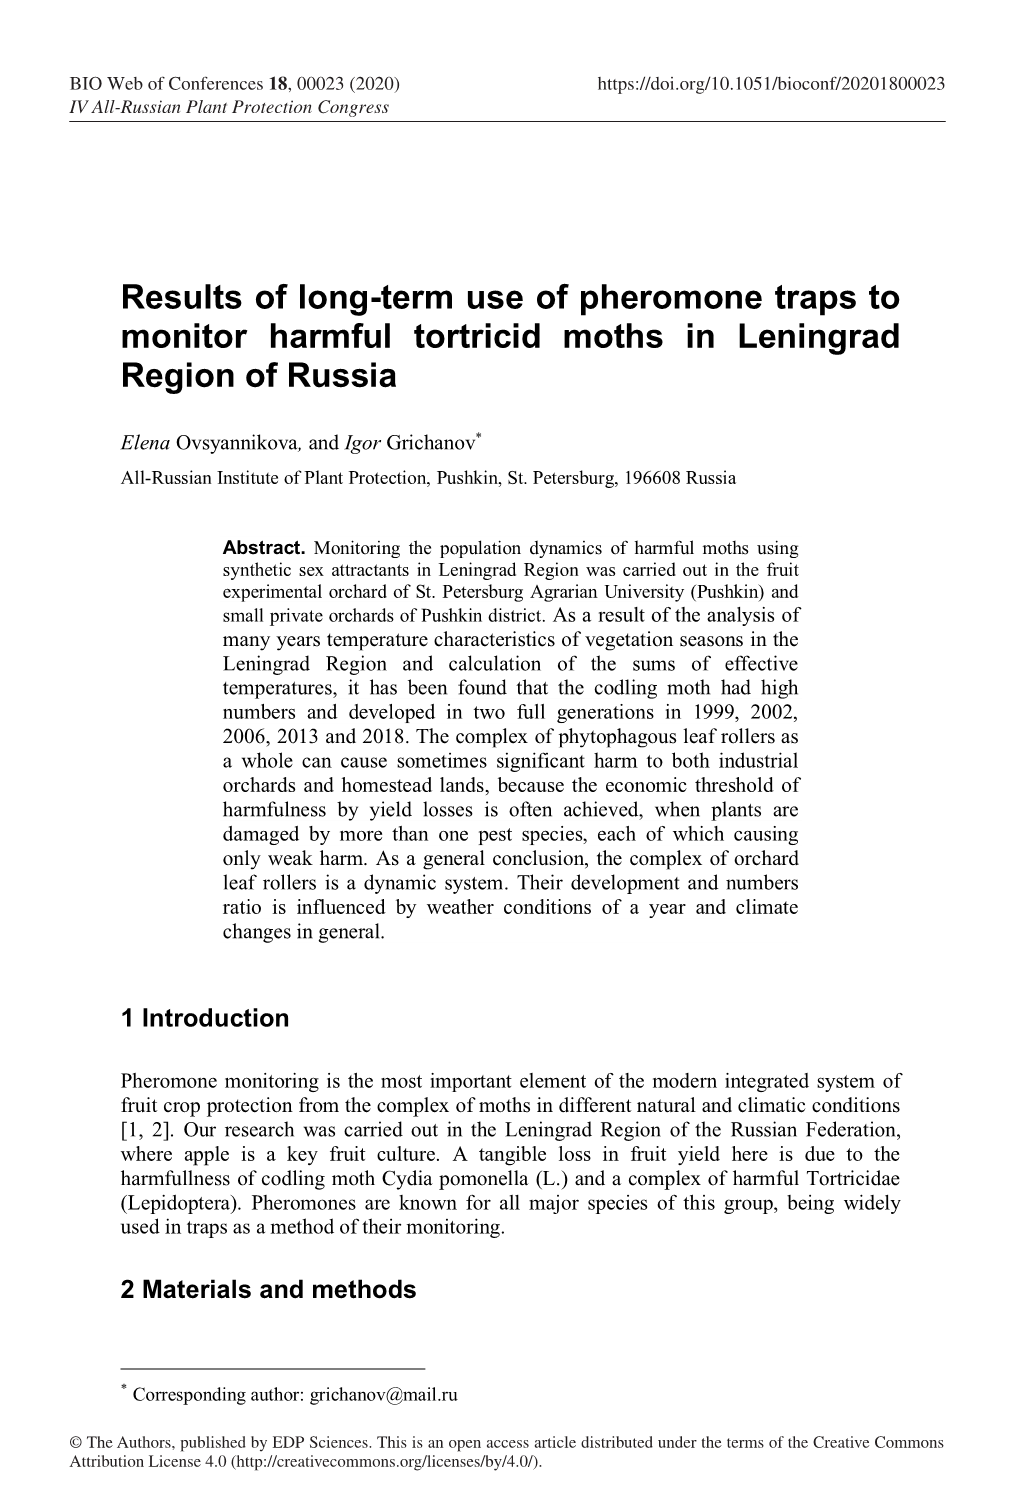 Results of Long-Term Use of Pheromone Traps to Monitor Harmful Tortricid Moths in Leningrad Region of Russia